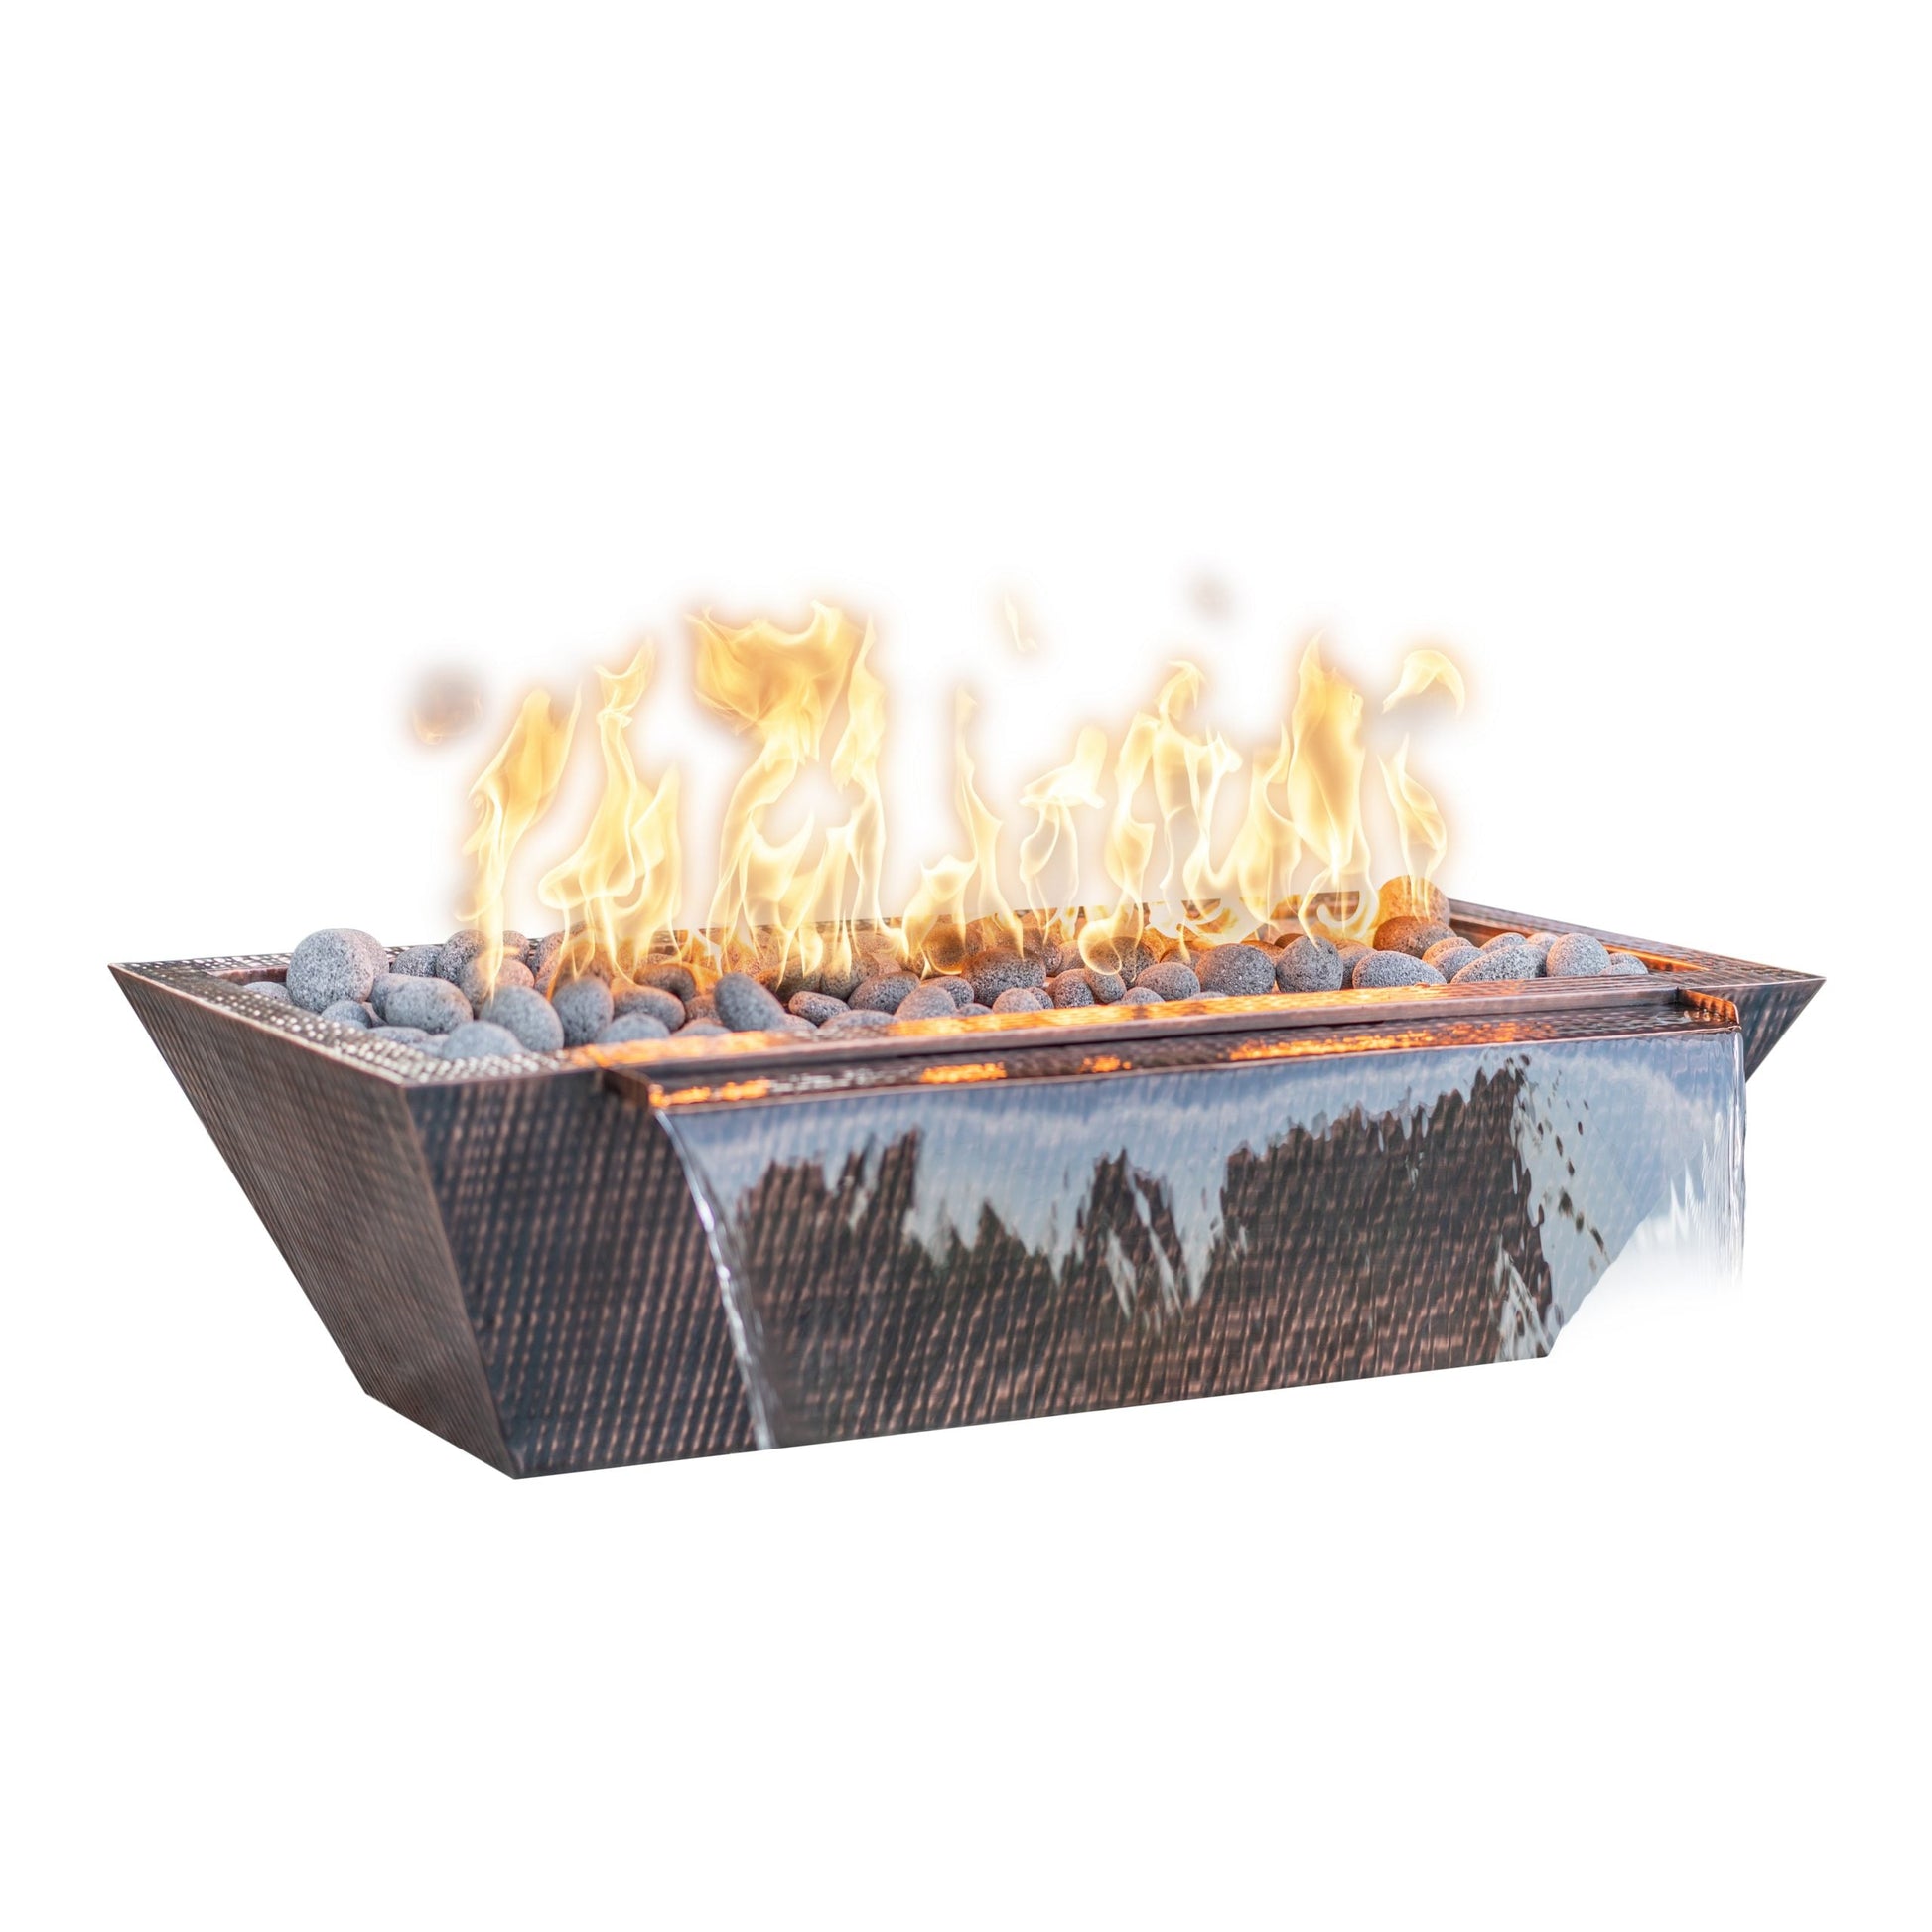 The Outdoor Plus Linear Maya 60" Stainless Steel Liquid Propane Fire & Water Bowl with Match Lit with Flame Sense Ignition